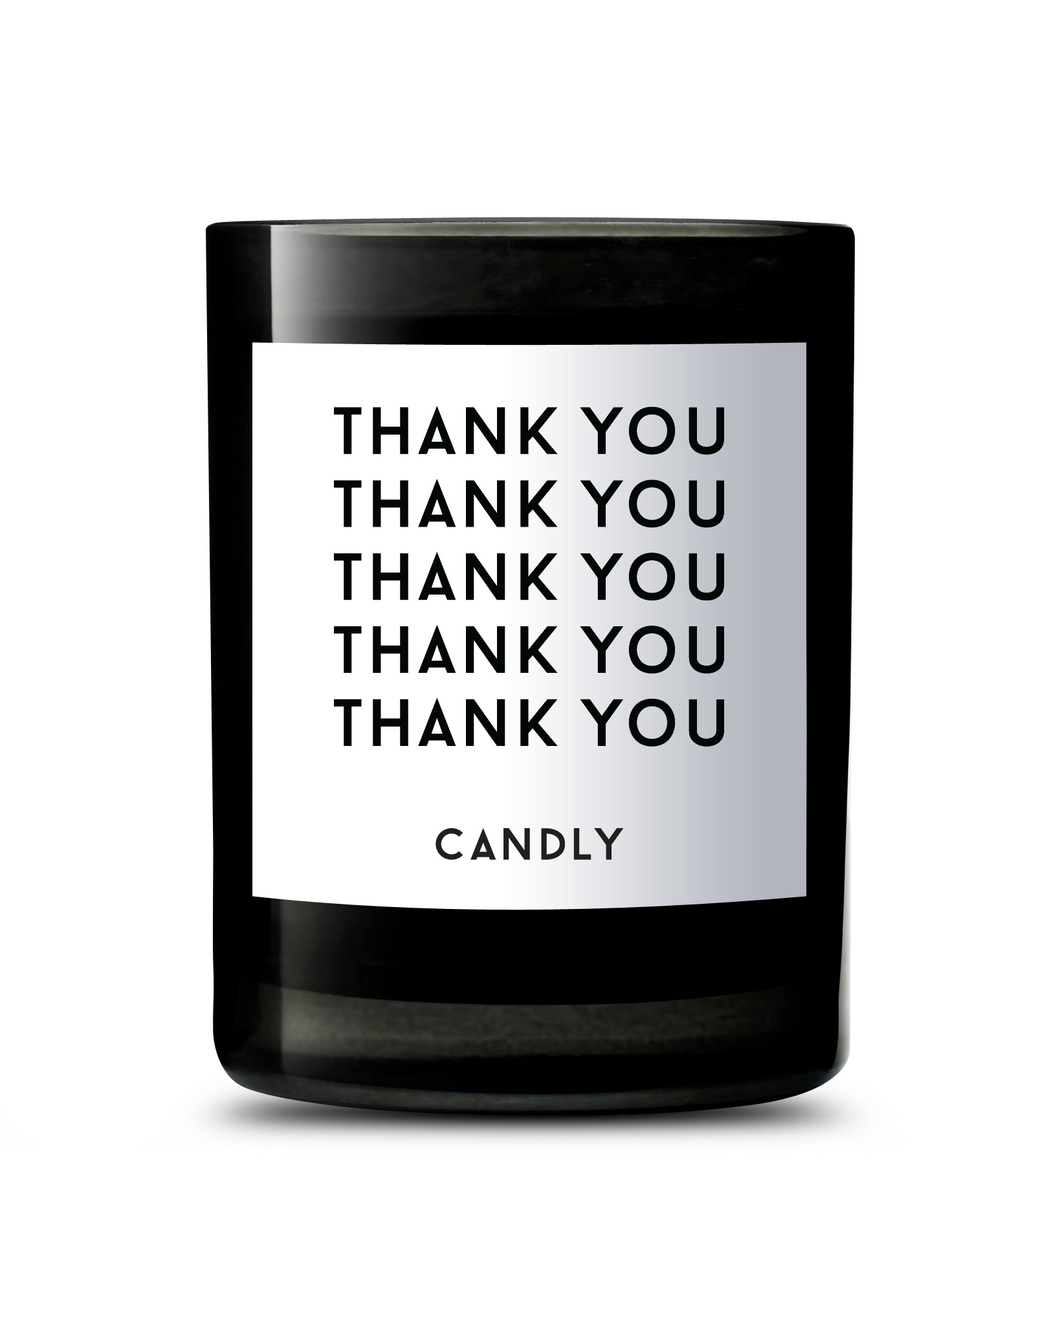 The Thank You Candle